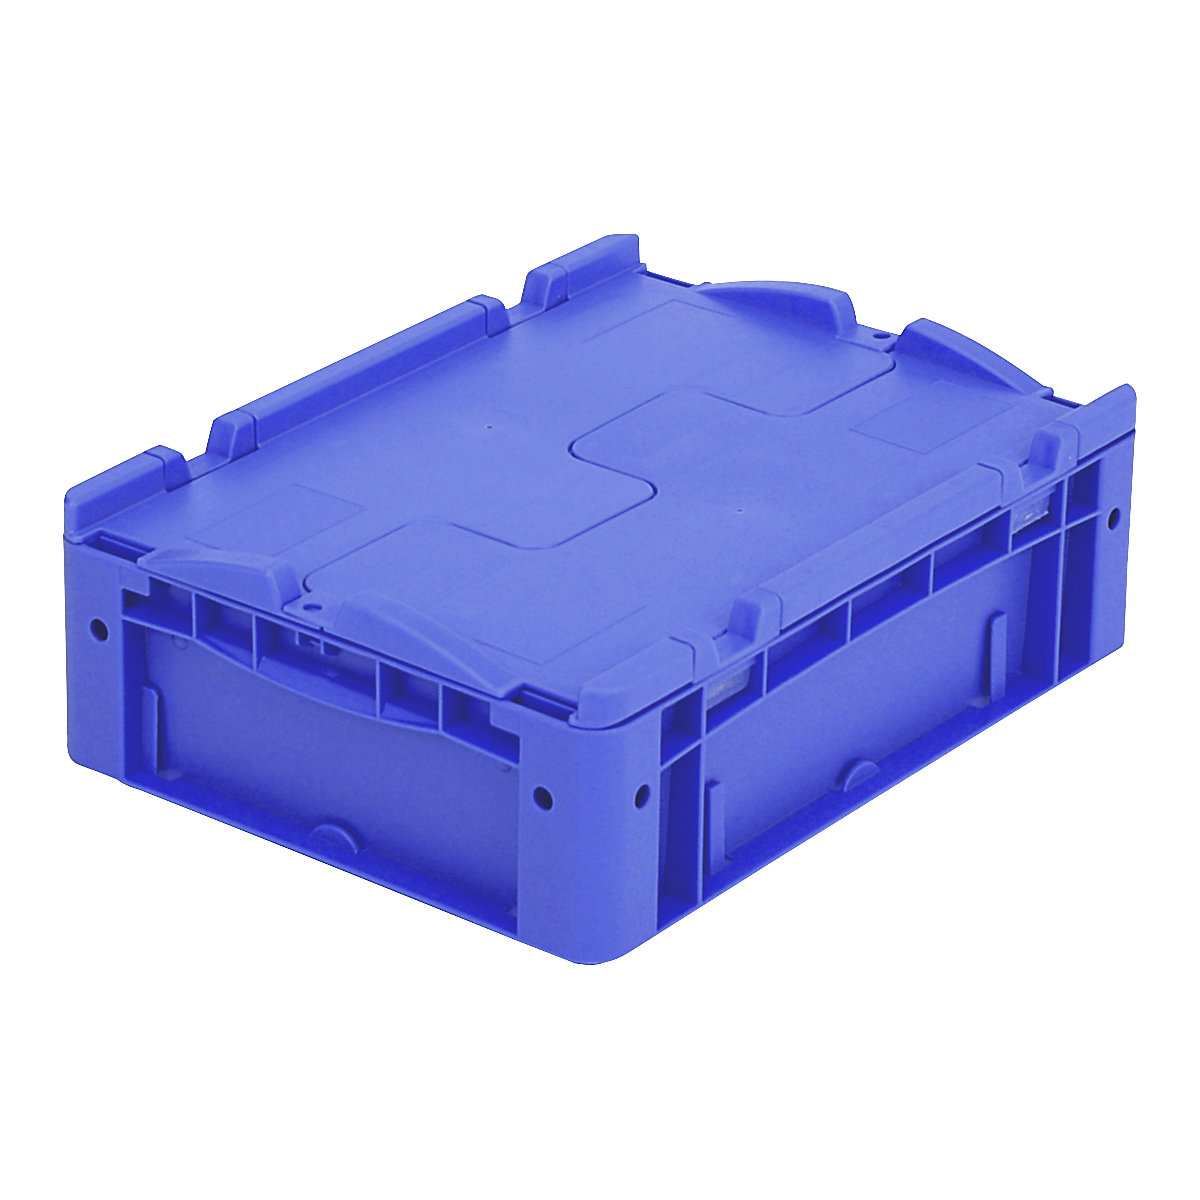 XL Euro stacking container – BITO, with 2-section hinged lid, LxWxH 400 x 300 x 138 mm-9